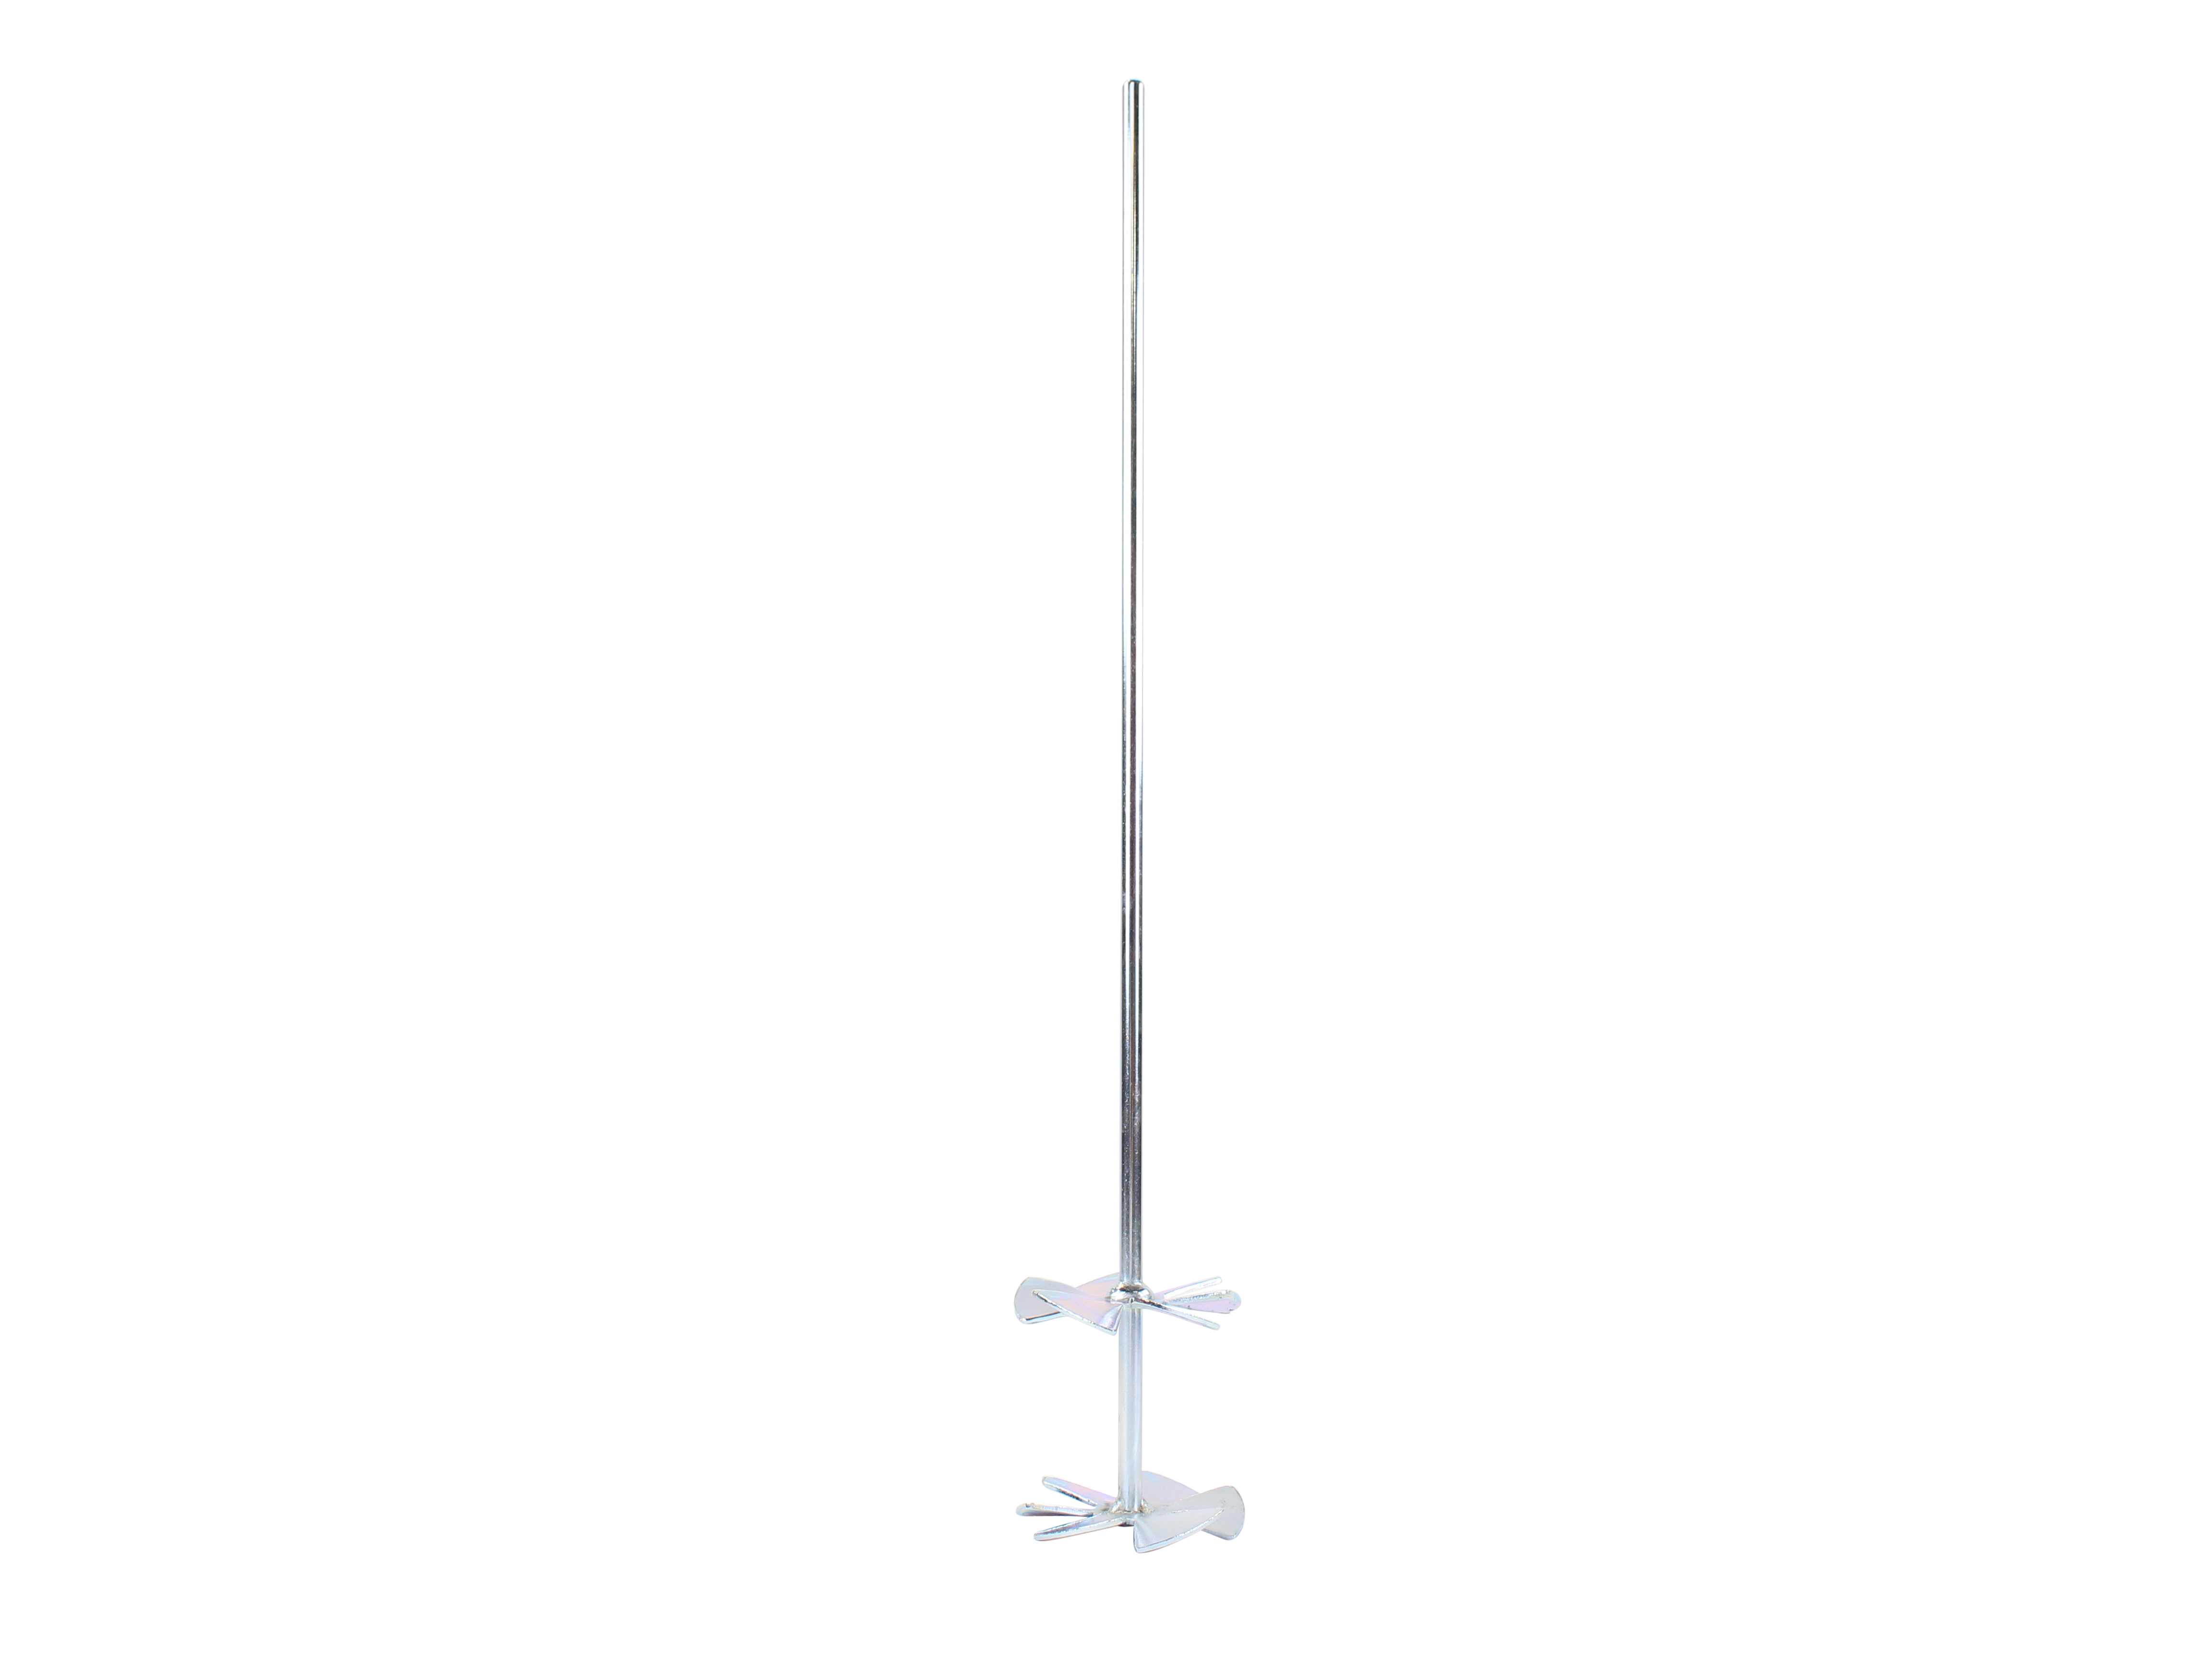 Mixer 75 mm - Stirrer available in various sizes